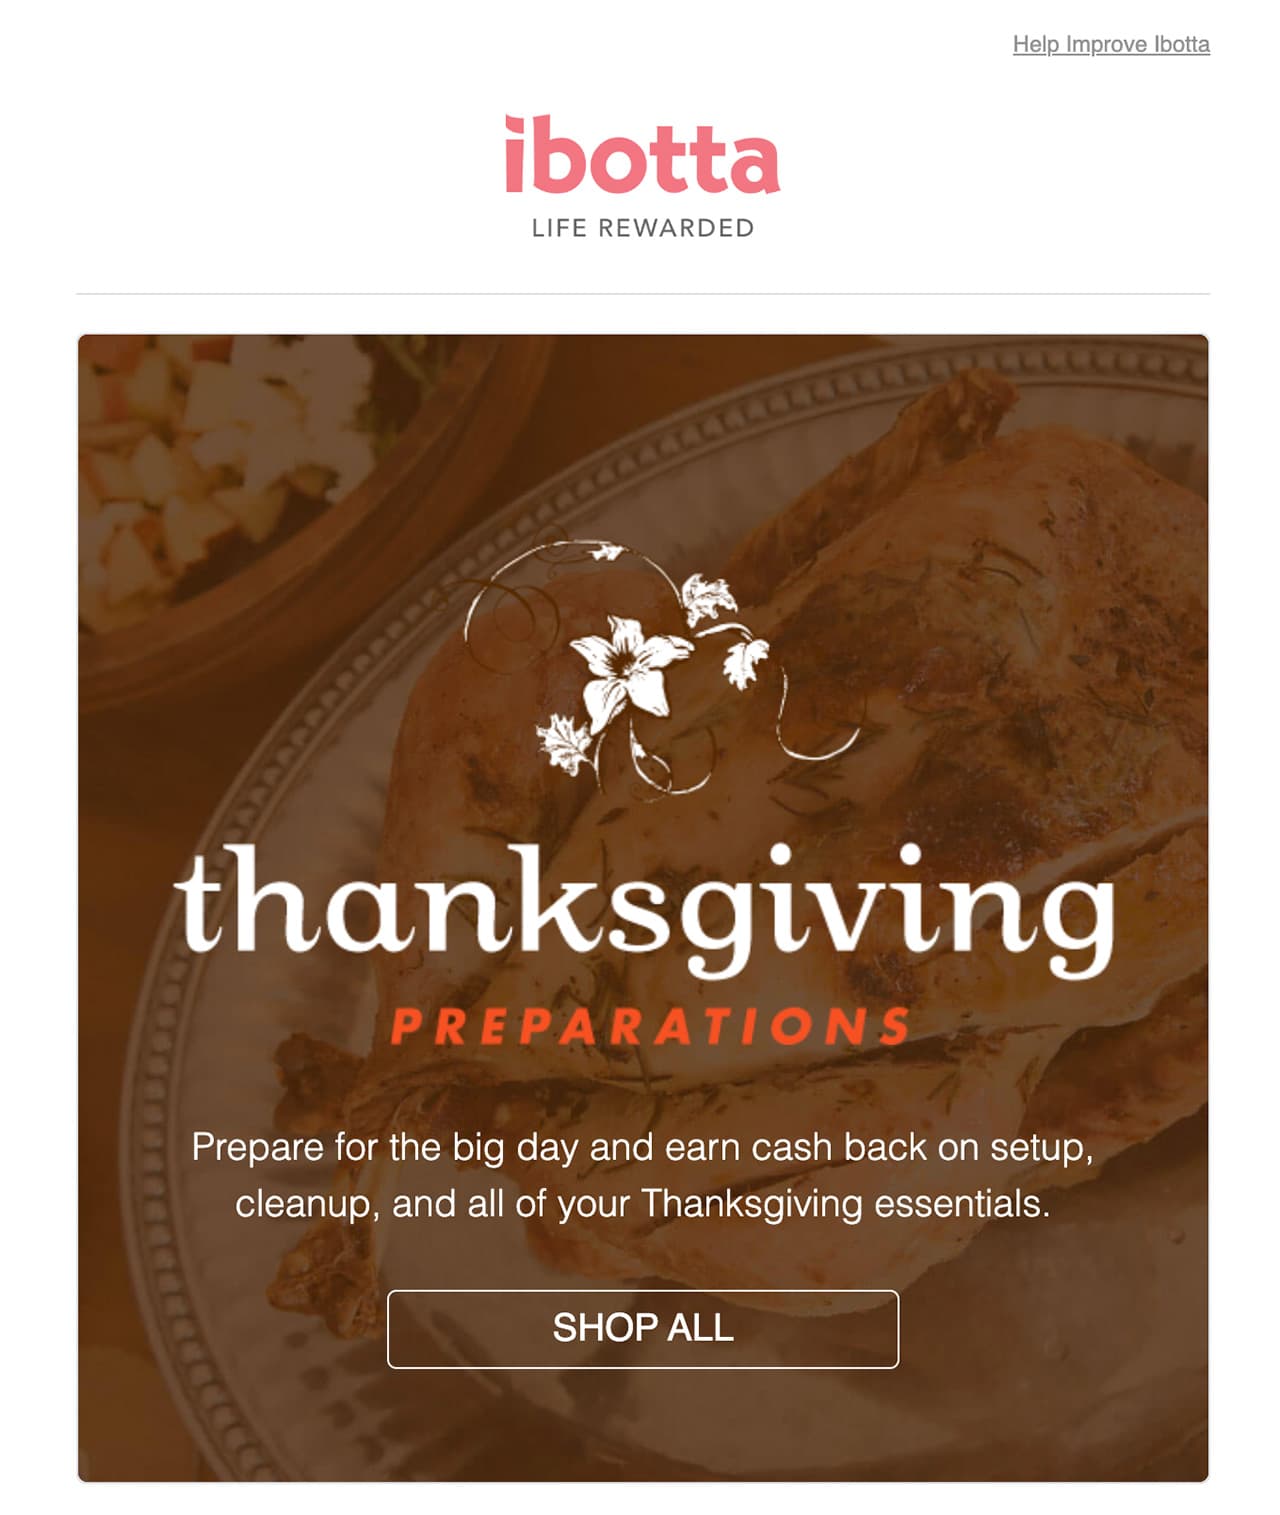 Thanksgiving email newsletter example